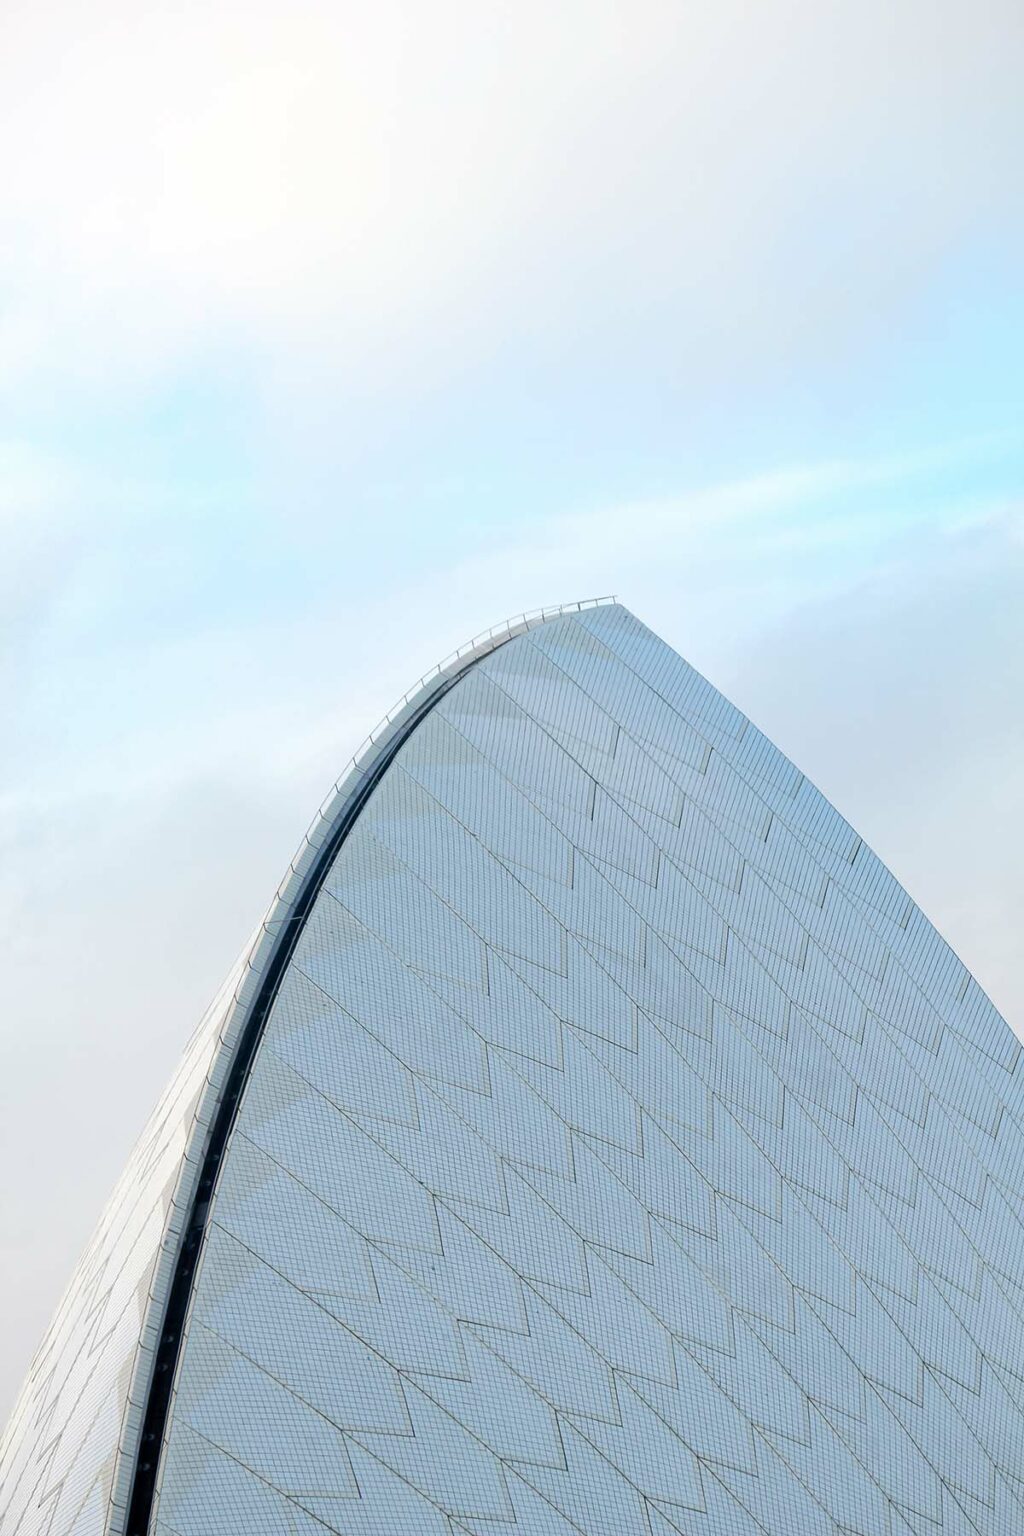 the famous arched roofline if the Sydney Opera House